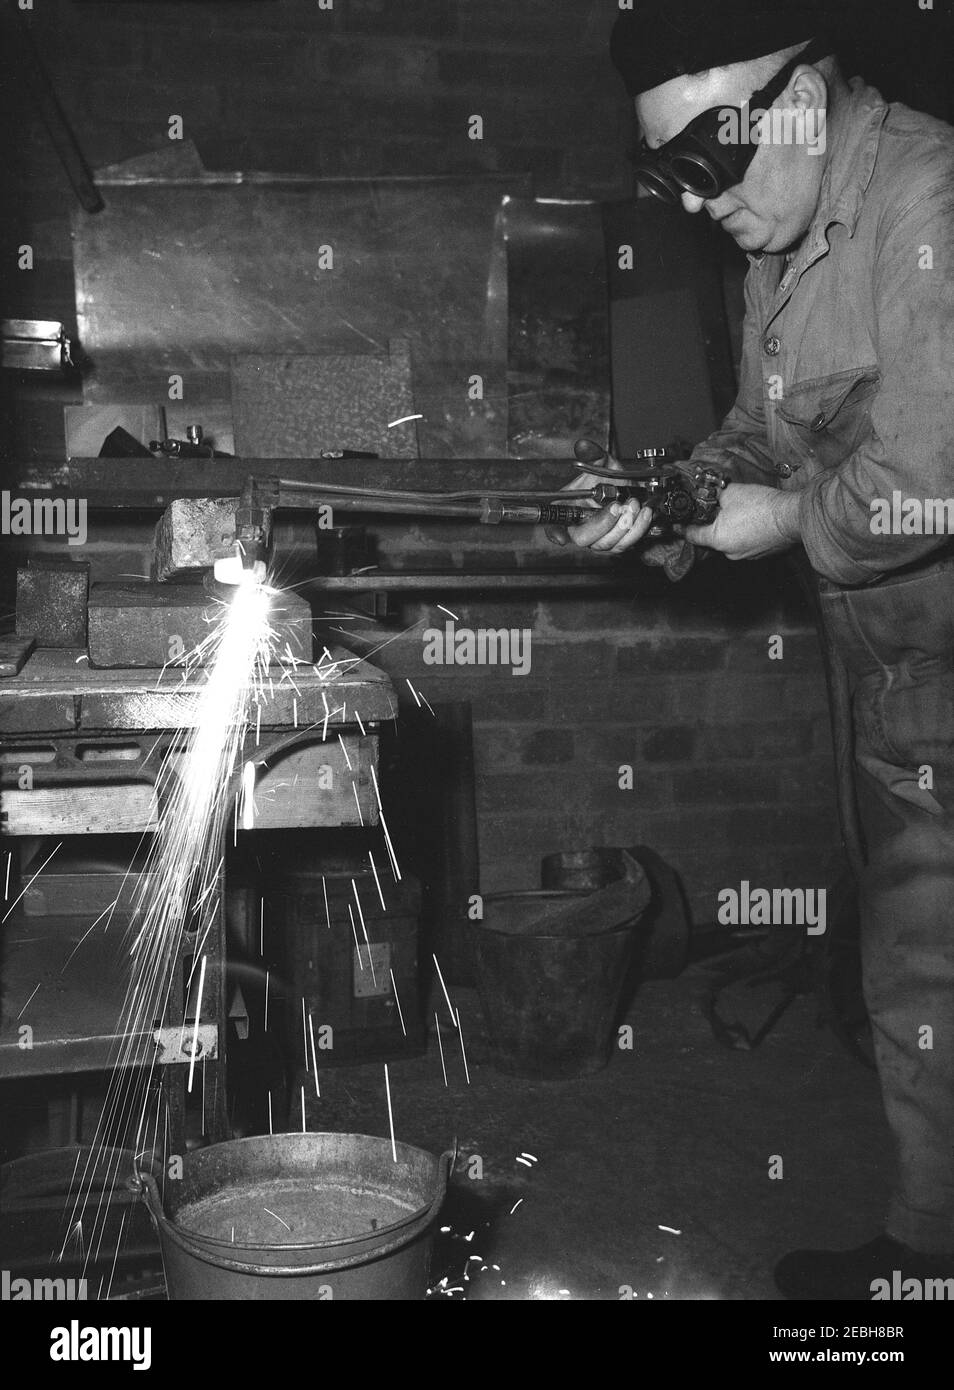 1950s, historical, an artisan workman in overalls and wearing goggles and a berry on his hat in a small workshop doing metalwork or welding. Welding is the process of joining metals together. Fusion is the generic sheet metal fabrication term for joining together metals of similar compositions and melting points. A pool of molten material called the weld pool is formed due to the high melting points of the workpieces. Stock Photo